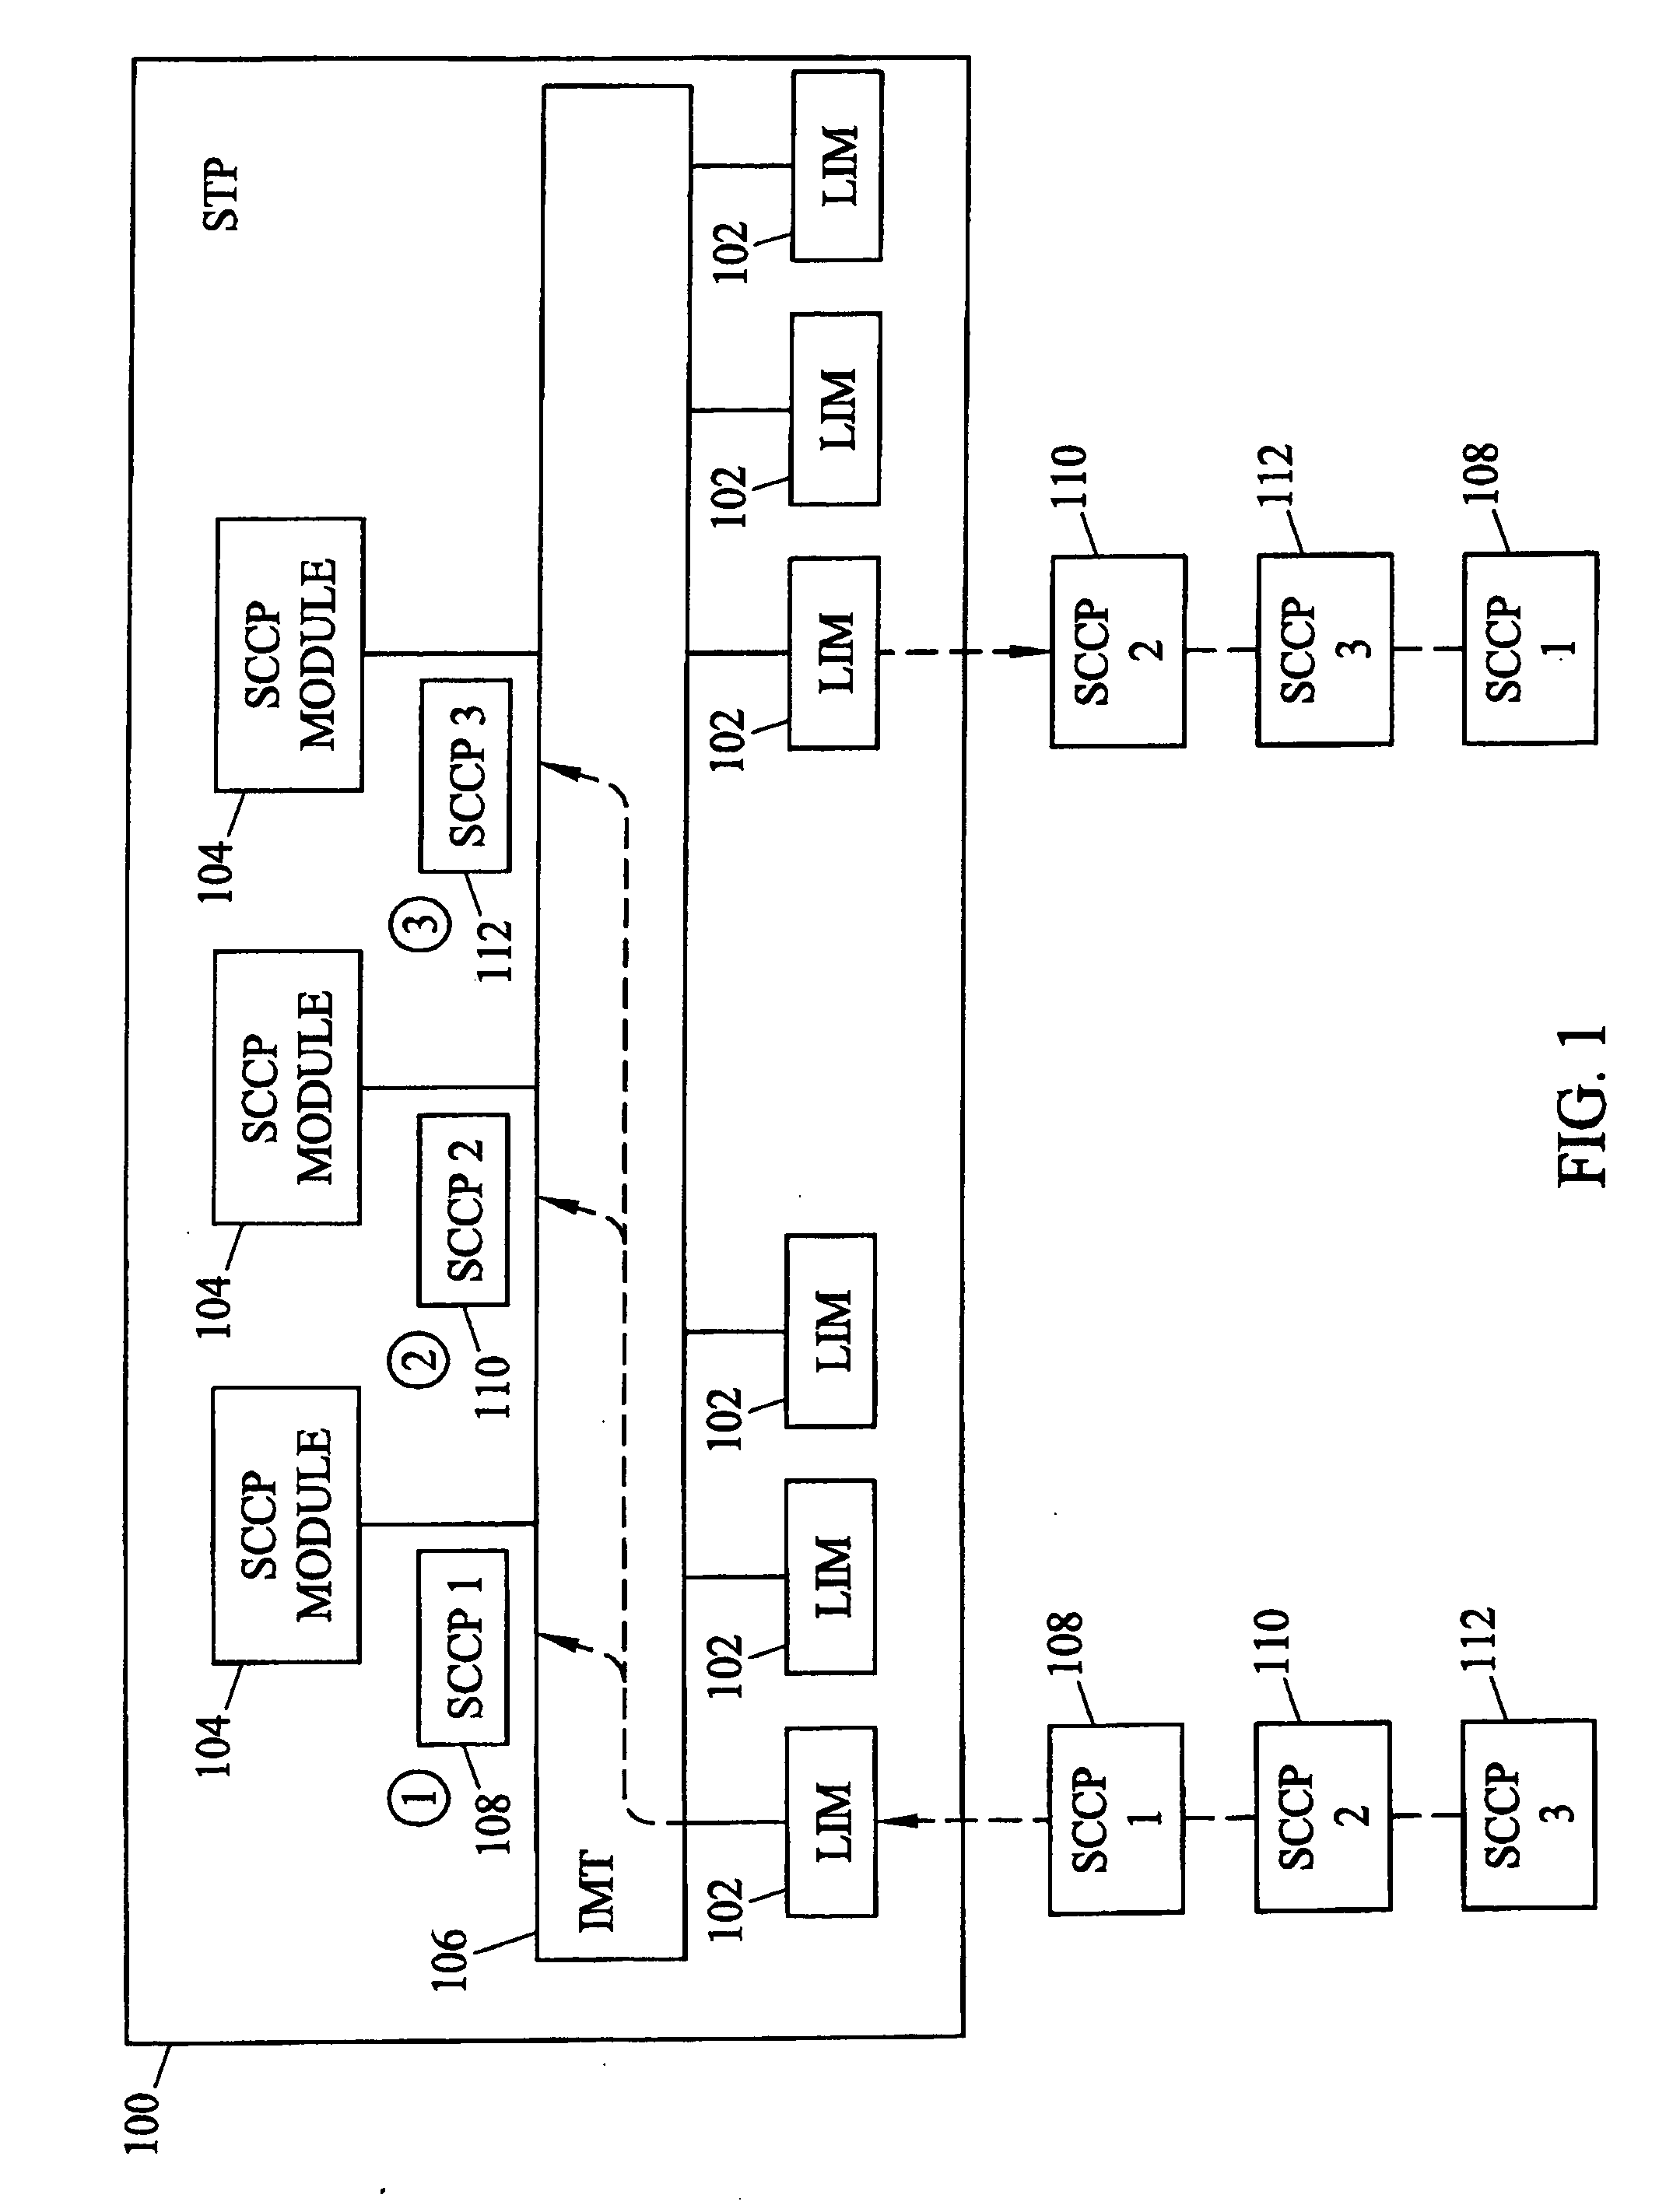 Methods and systems for load sharing and preserving sequencing of signaling connection control part (SCCP) messages